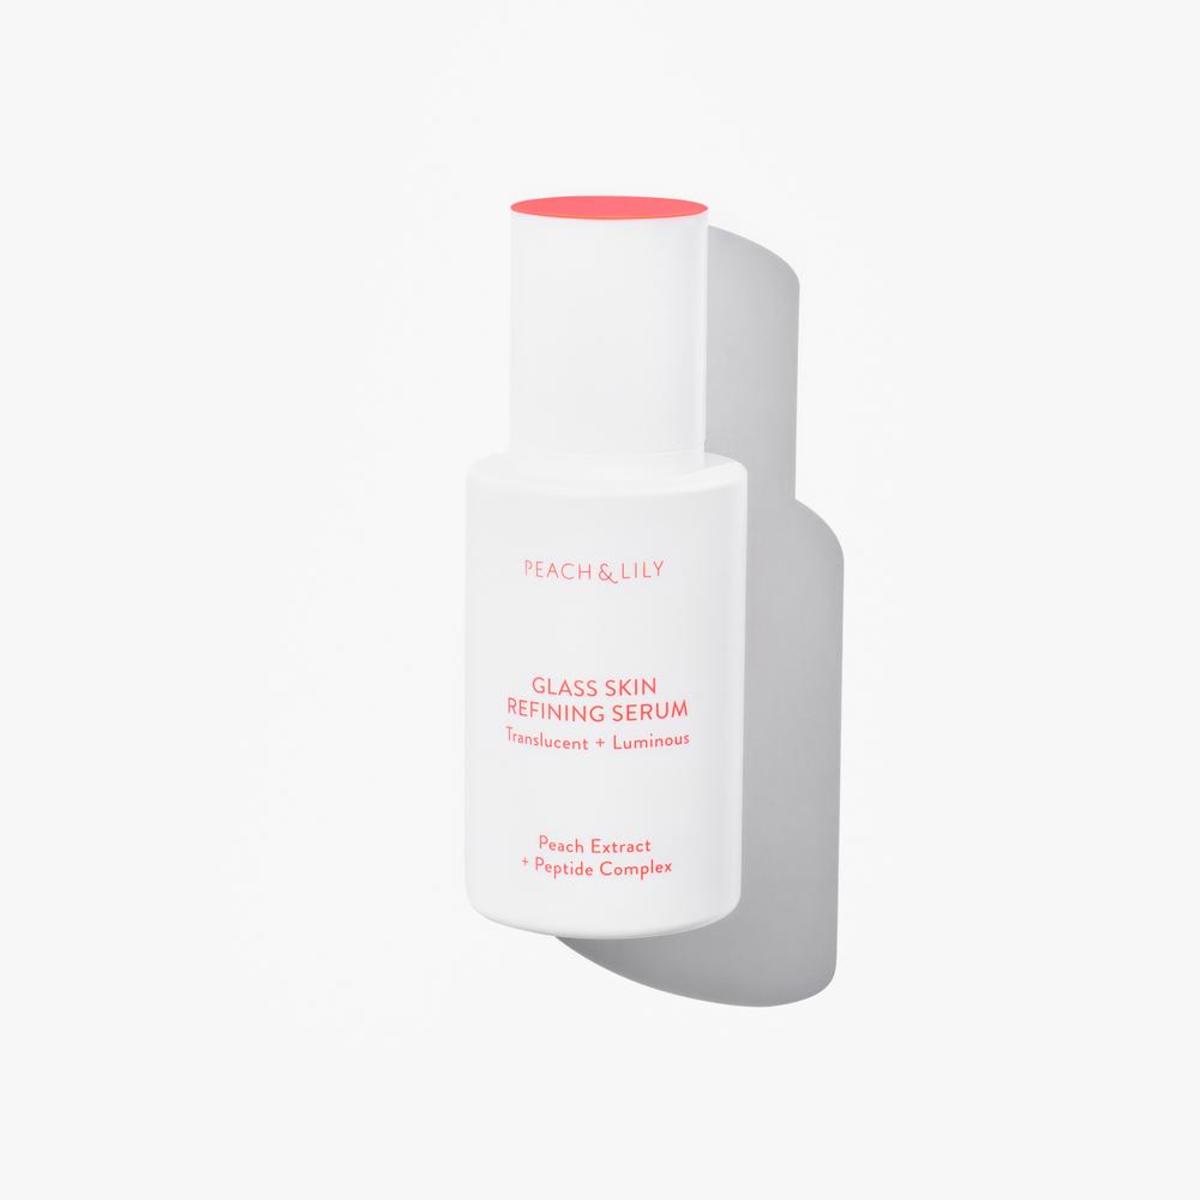 Peach & Lily Glass Skin Refining Serum, $39, available here. Photo: courtesy